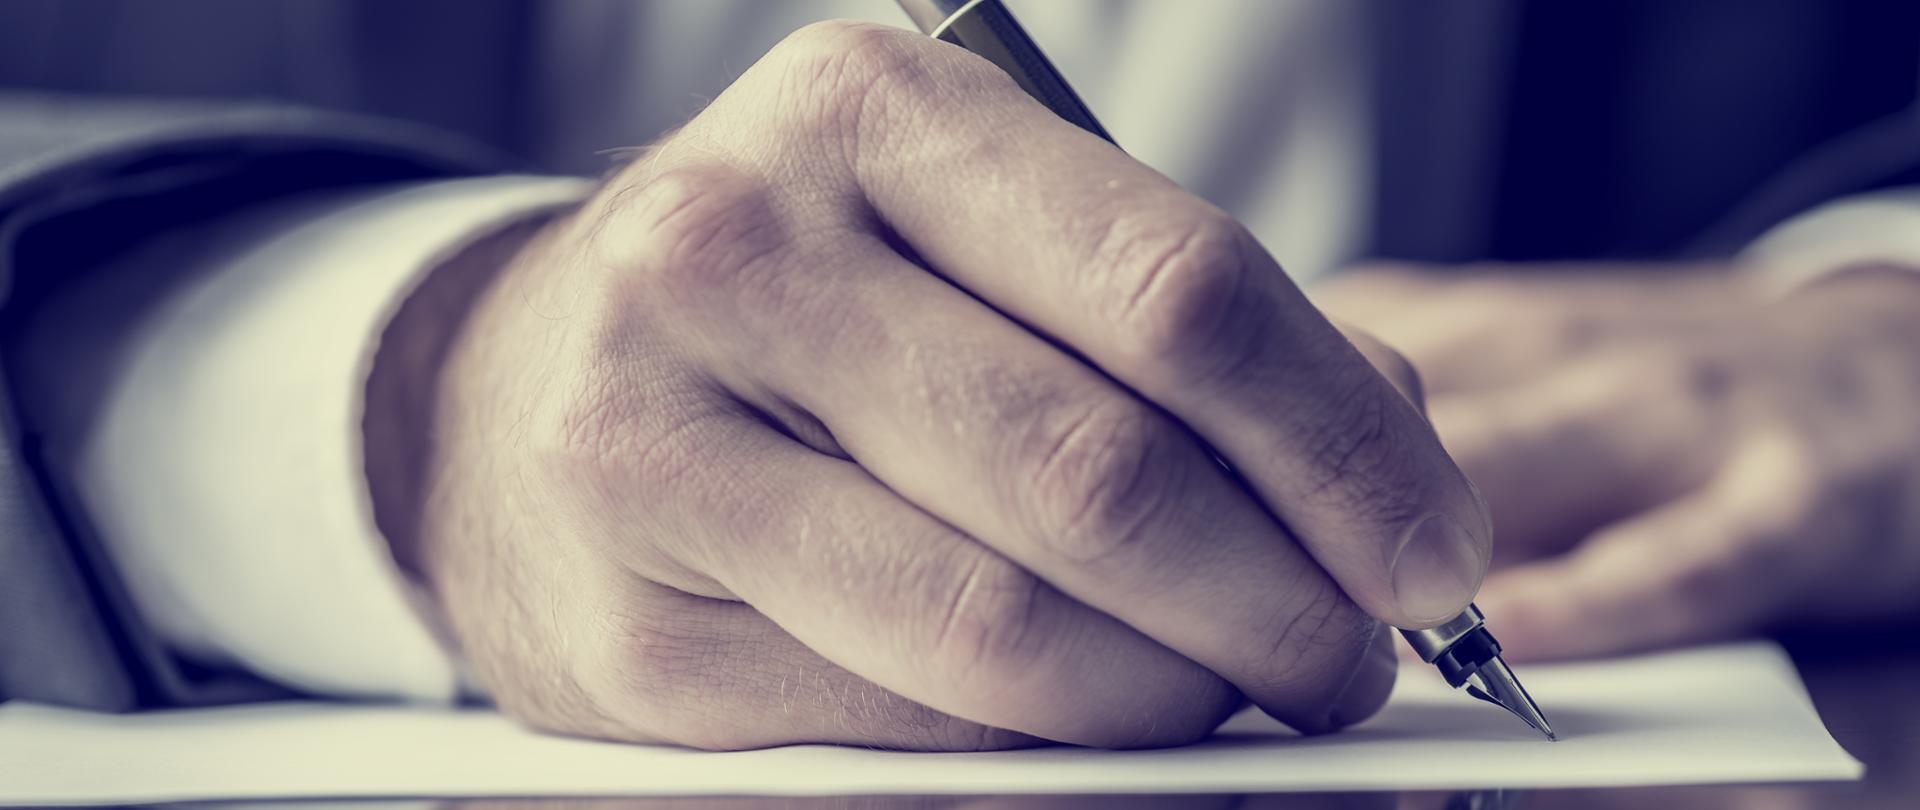 Man signing a document or writing correspondence with a close up view of his hand with the pen and sheet of notepaper on a desk top. With retro filter effect.